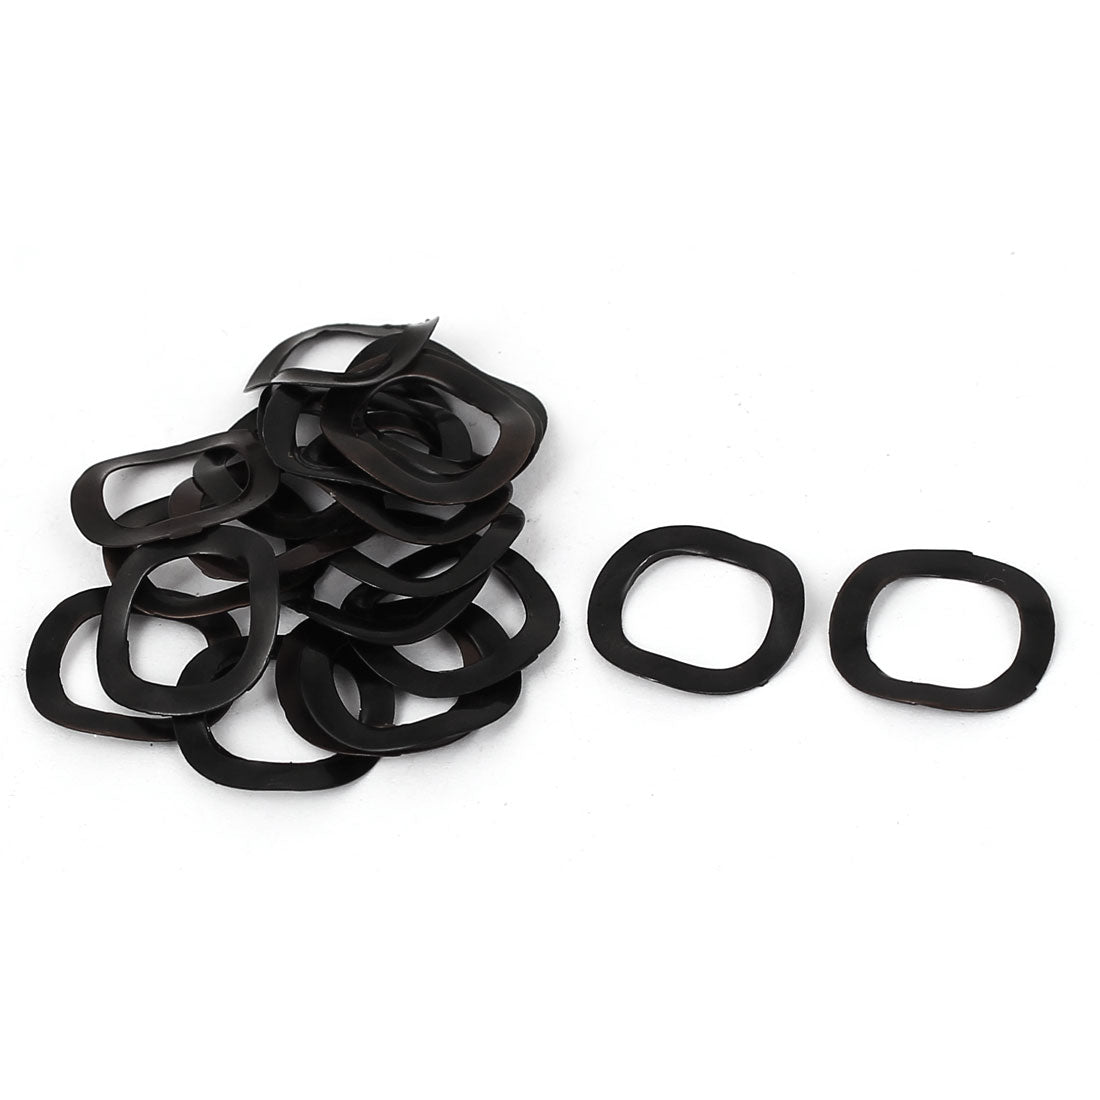 uxcell Uxcell 20 Pcs Black Metal Wave Crinkle Spring Washer 10mm x 15mm x 0.3mm